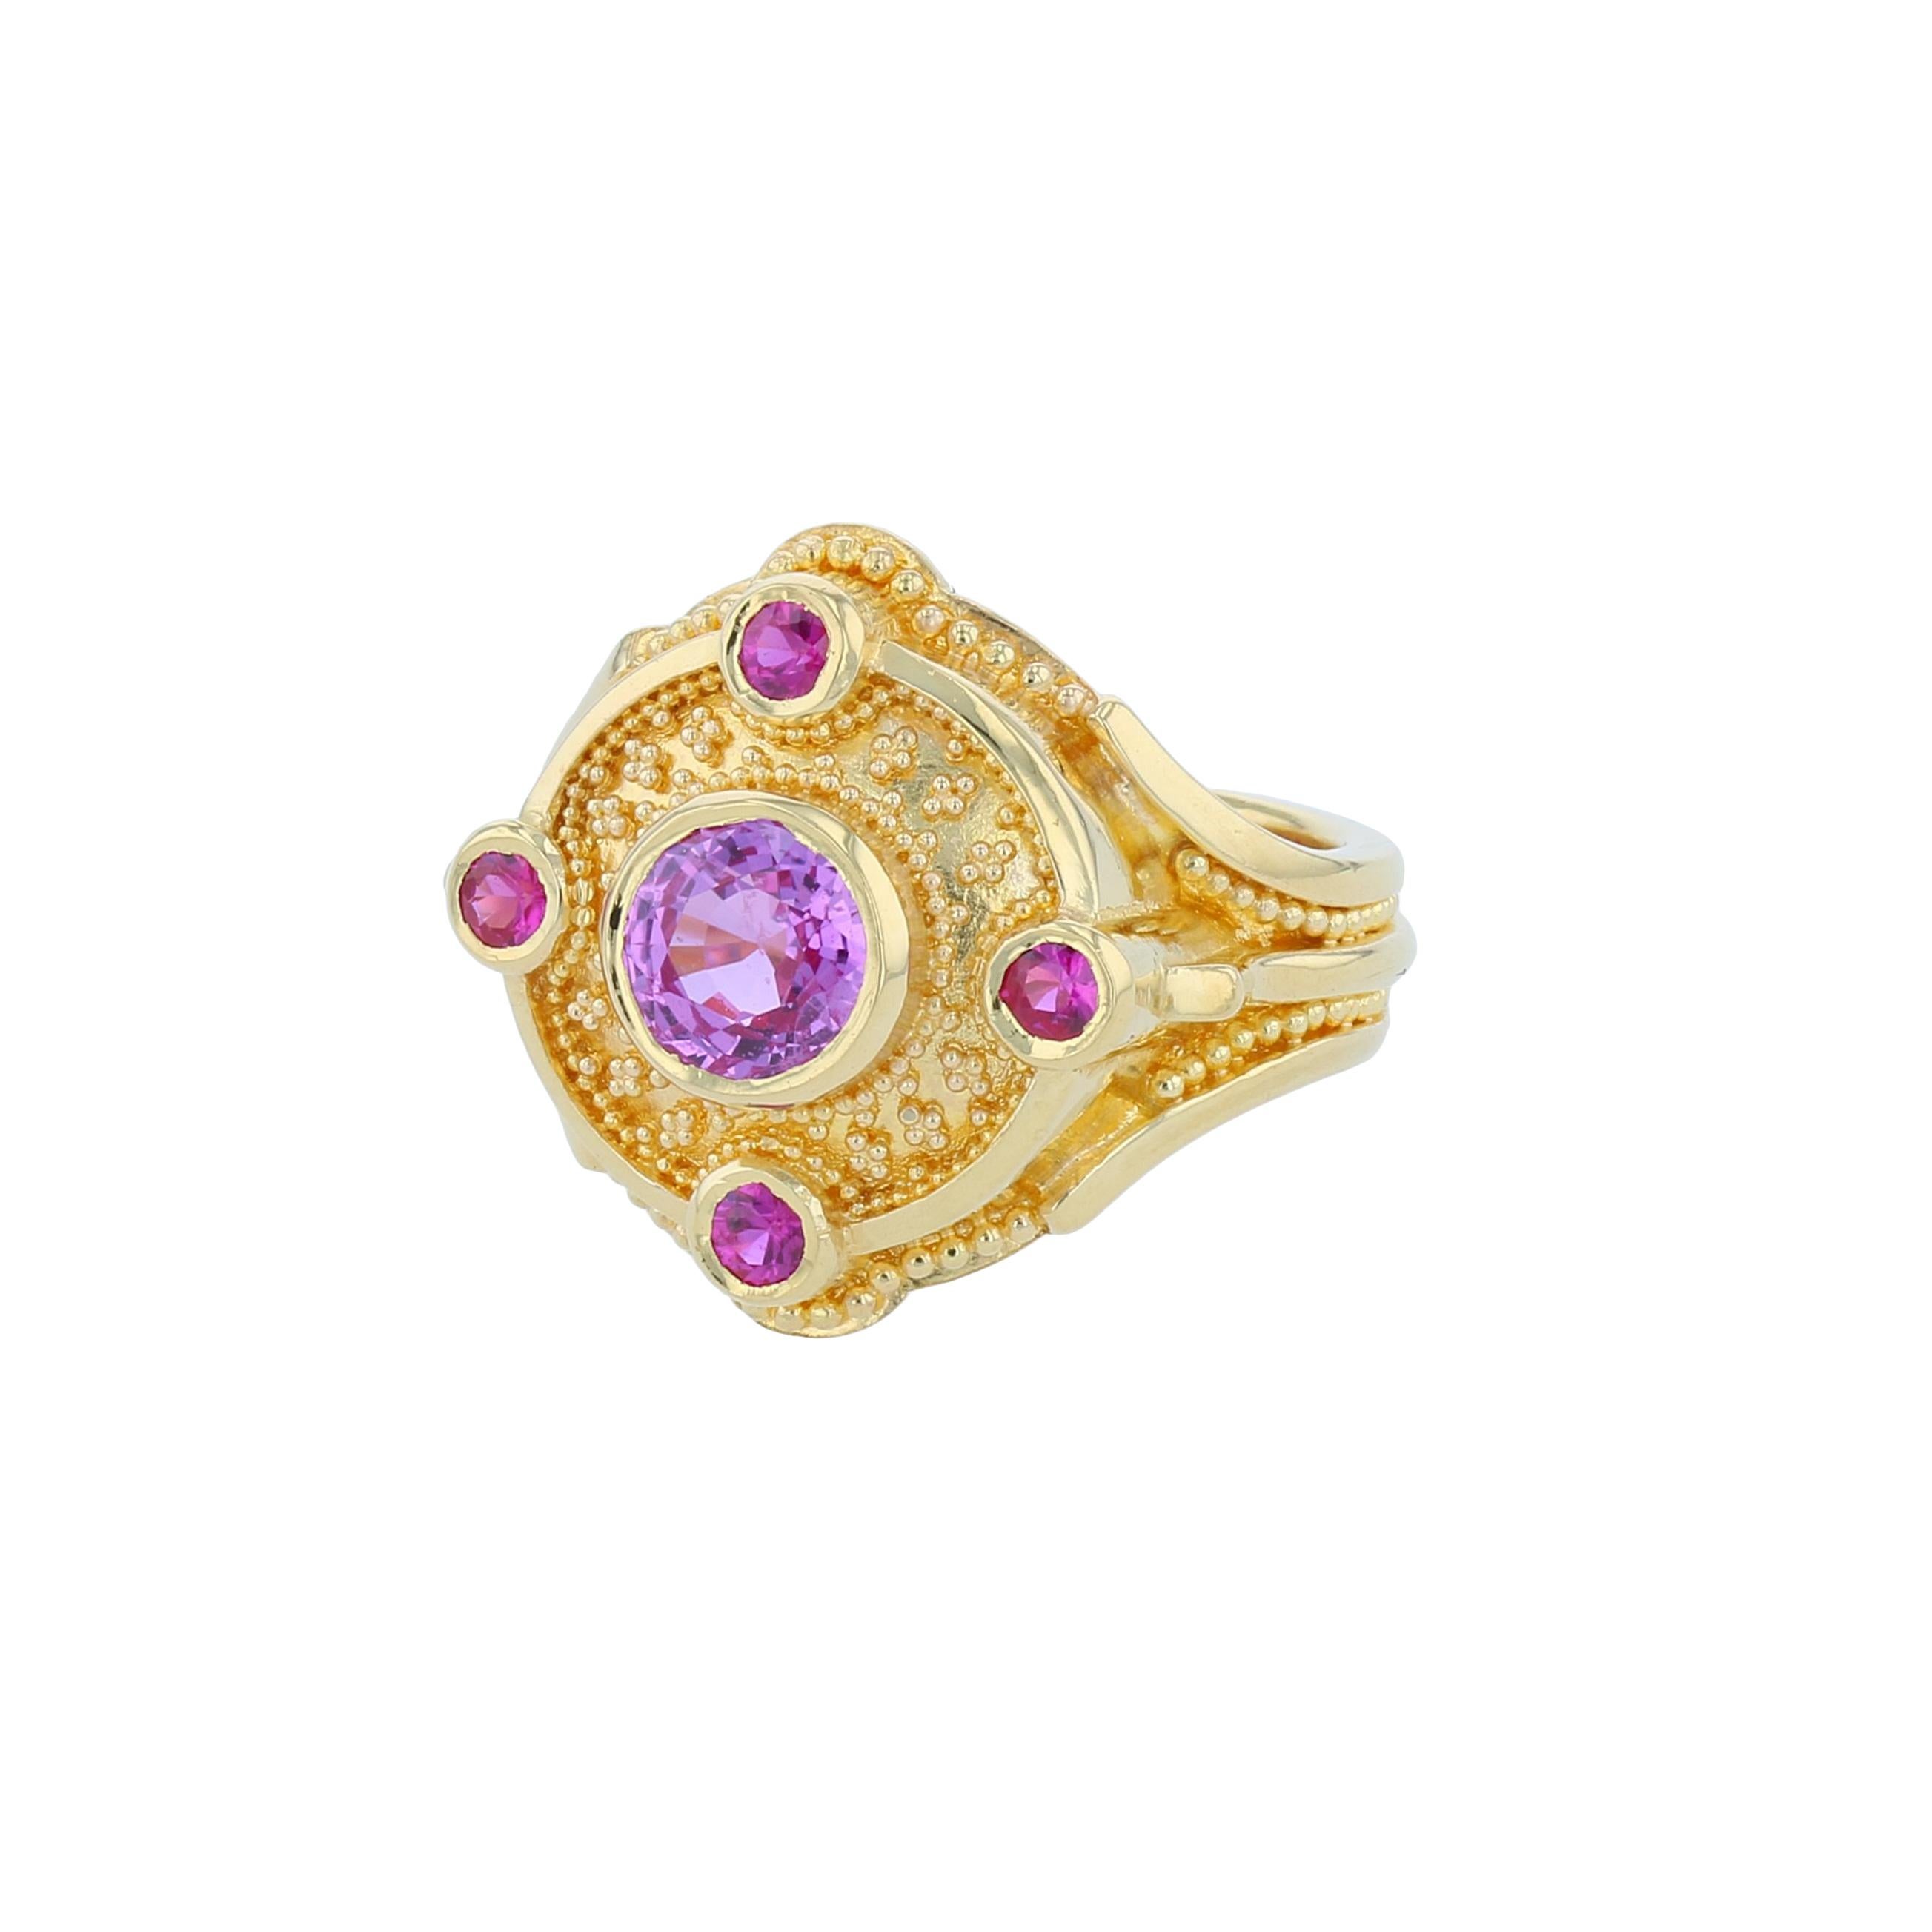 Kent Raible's 'Four Directions' cocktail ring is so striking, and yet not overstated. The Four Directions ring just looks great on everybody. This ring has all the Raible trademarks we love! This ring has multiple levels, giving much interest and